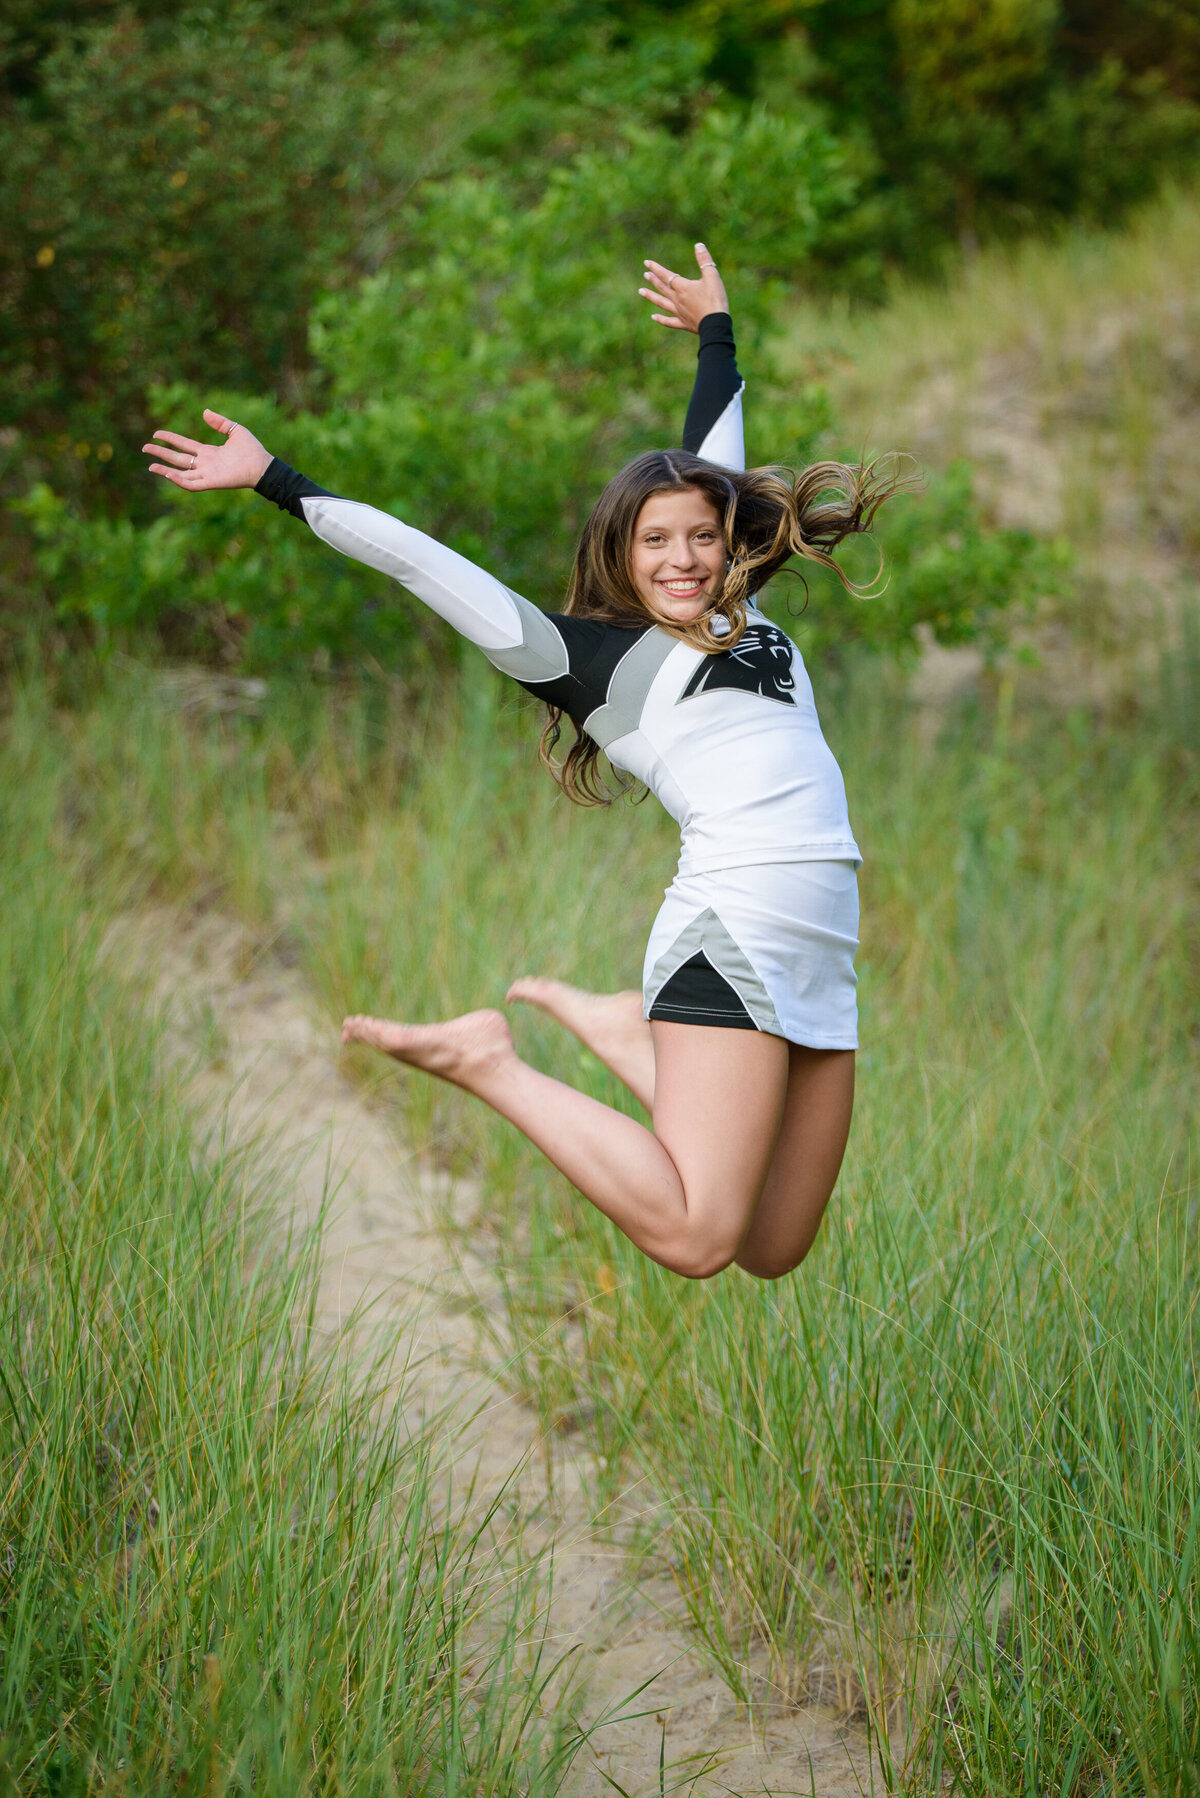 Grand-Haven-MI-Best-Sports-and-Hobbies-Senior-Pictures-04